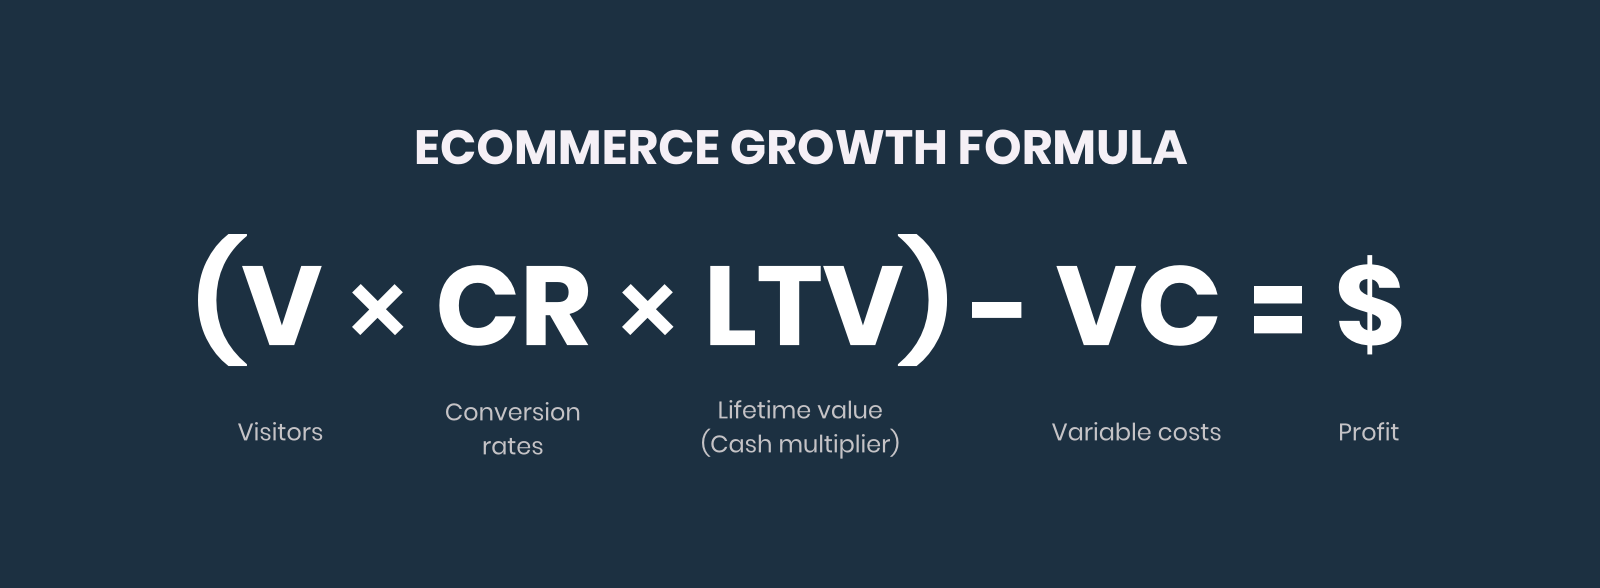 Ecommerce Growth Formula Applied to Cosmetics Marketing & the Beauty Industry